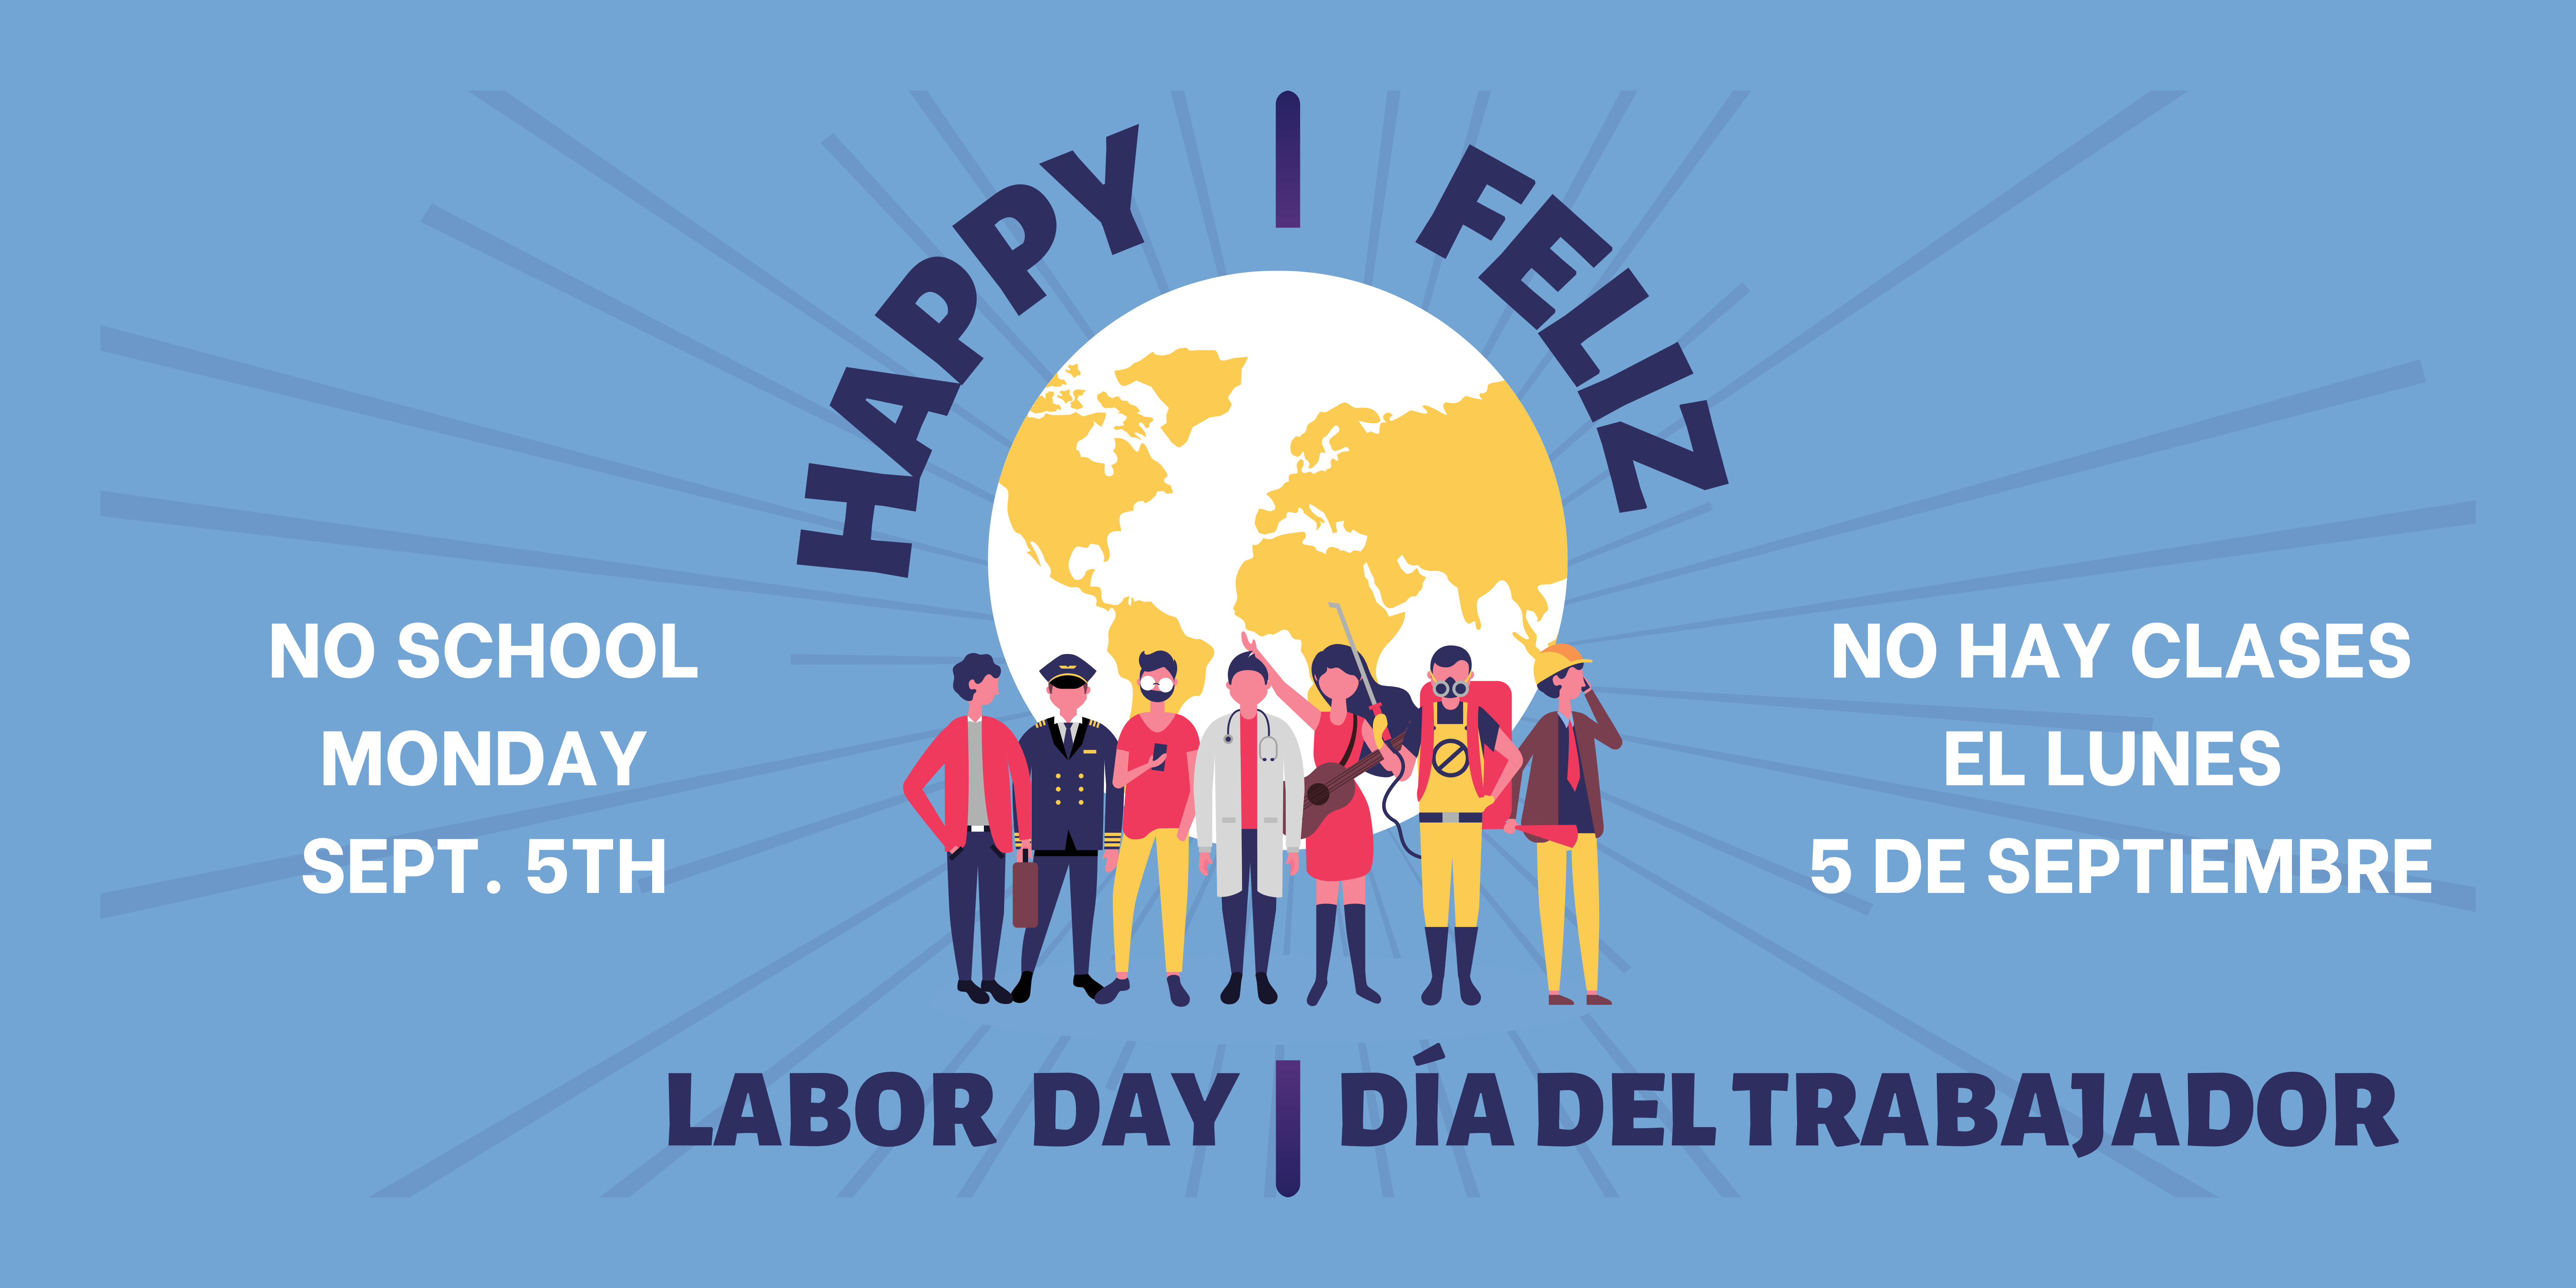 Image of a globe with people representing workers on blue background. Black text says, "Happy Labor Day" and "Feliz Día del Trabajador." White text says, "No School Monday September 5th" and "No hay clases el lunes 5 de septiembre."